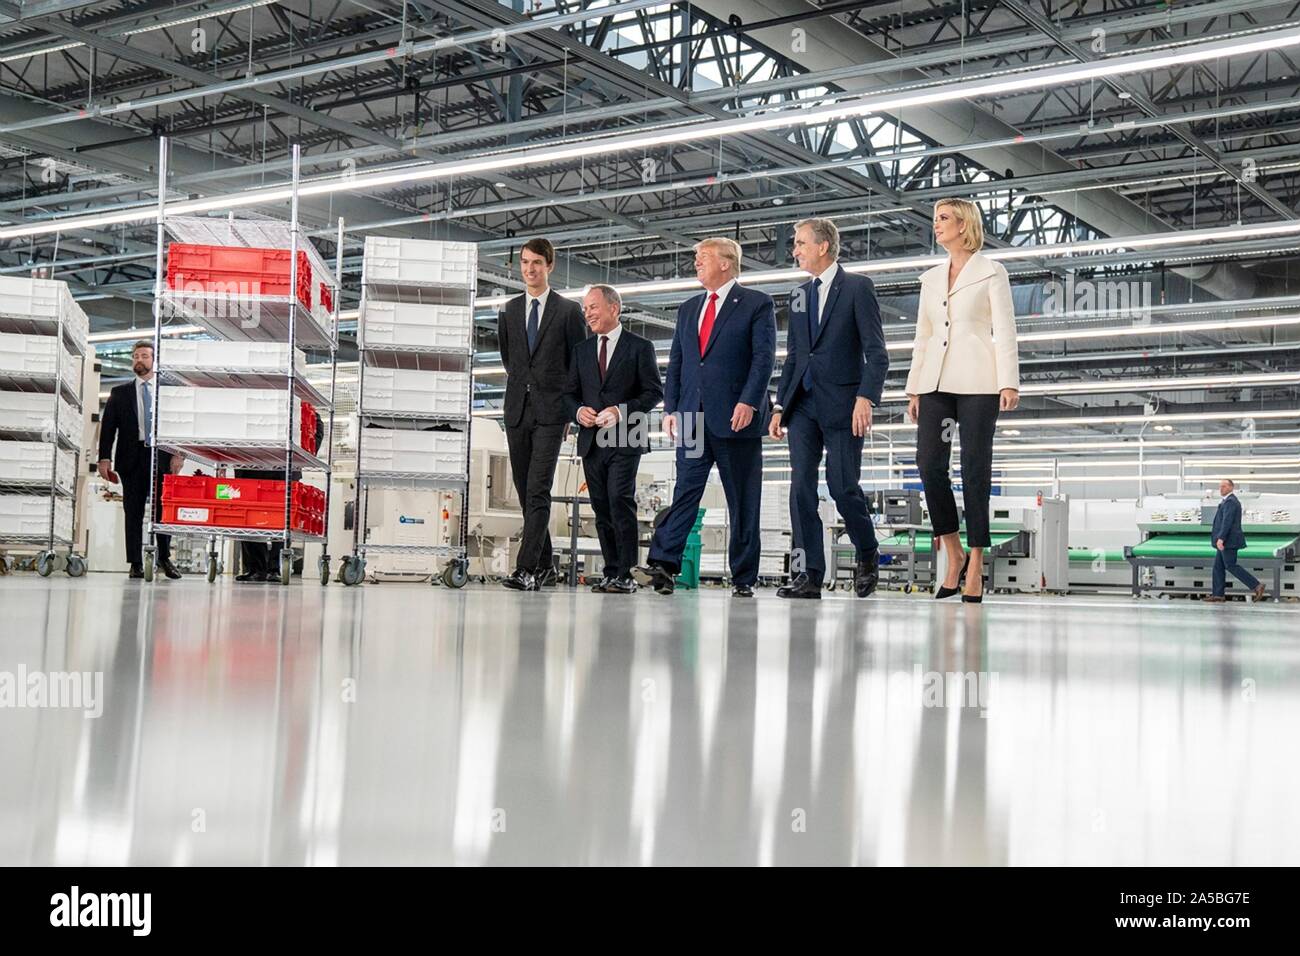 U.S President Donald Trump tours the newly opened Louis Vuitton Workshop Rochambeau October 17, 2019 in Alvarado, Texas. Joining the president from left to right are: Alexandre Arnault, Michael Burke of LVMH, Bernard Arnault, chief executive of LVMH, and Ivanka Trump. Stock Photo